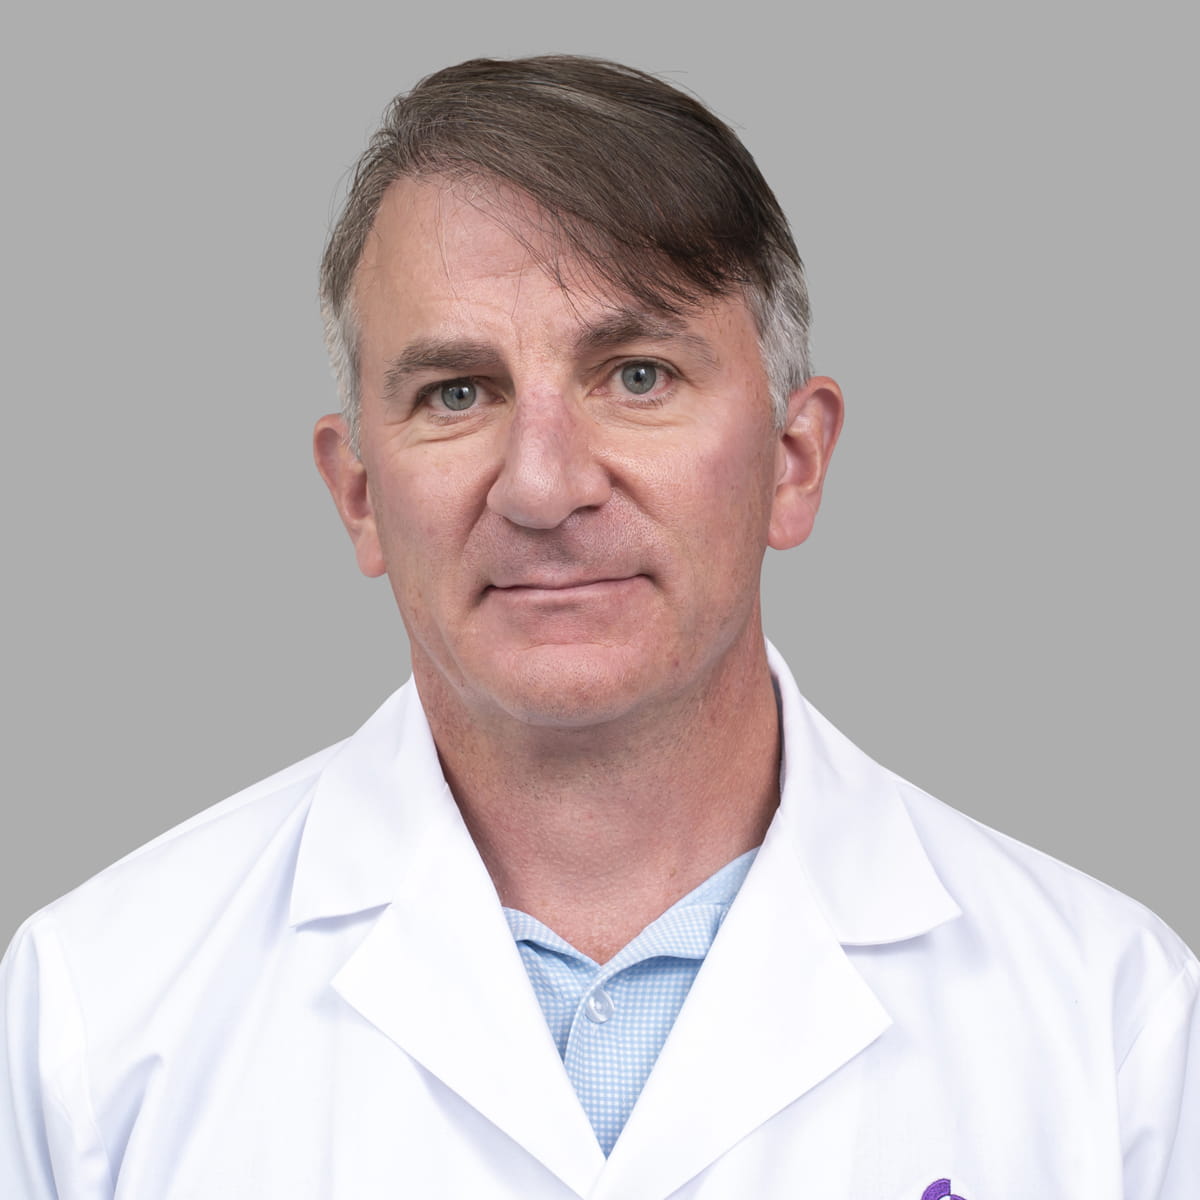 A friendly image of Jeffrey Donohue, MD